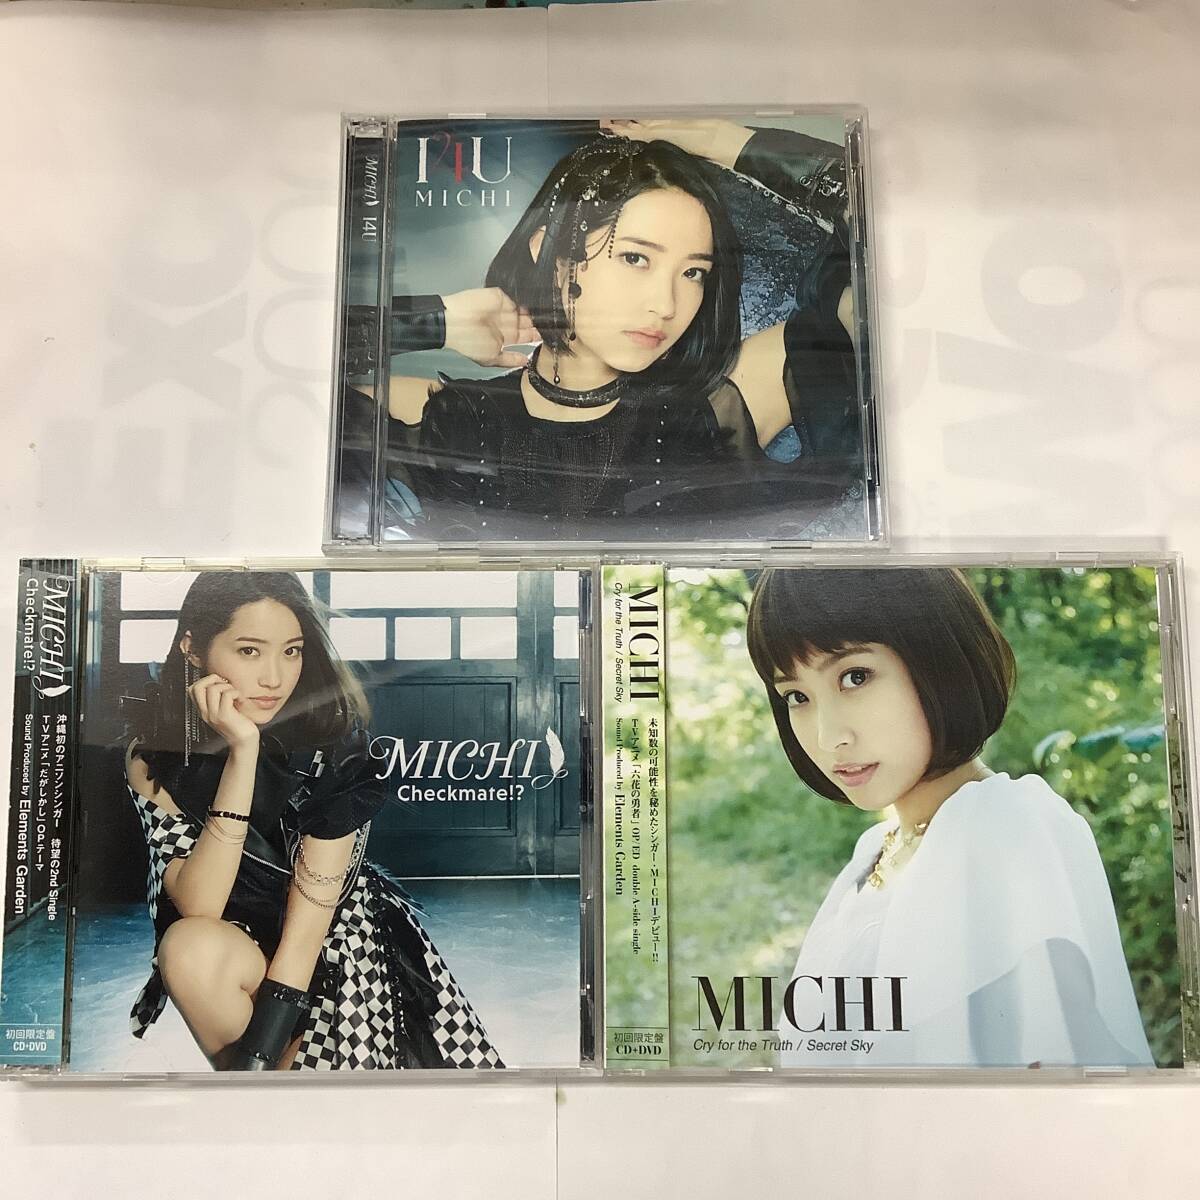 MICHI 3CD+DVD 全て初回限定盤 Checkmate!? I4U Cry for the Truth Secret Sky_画像1